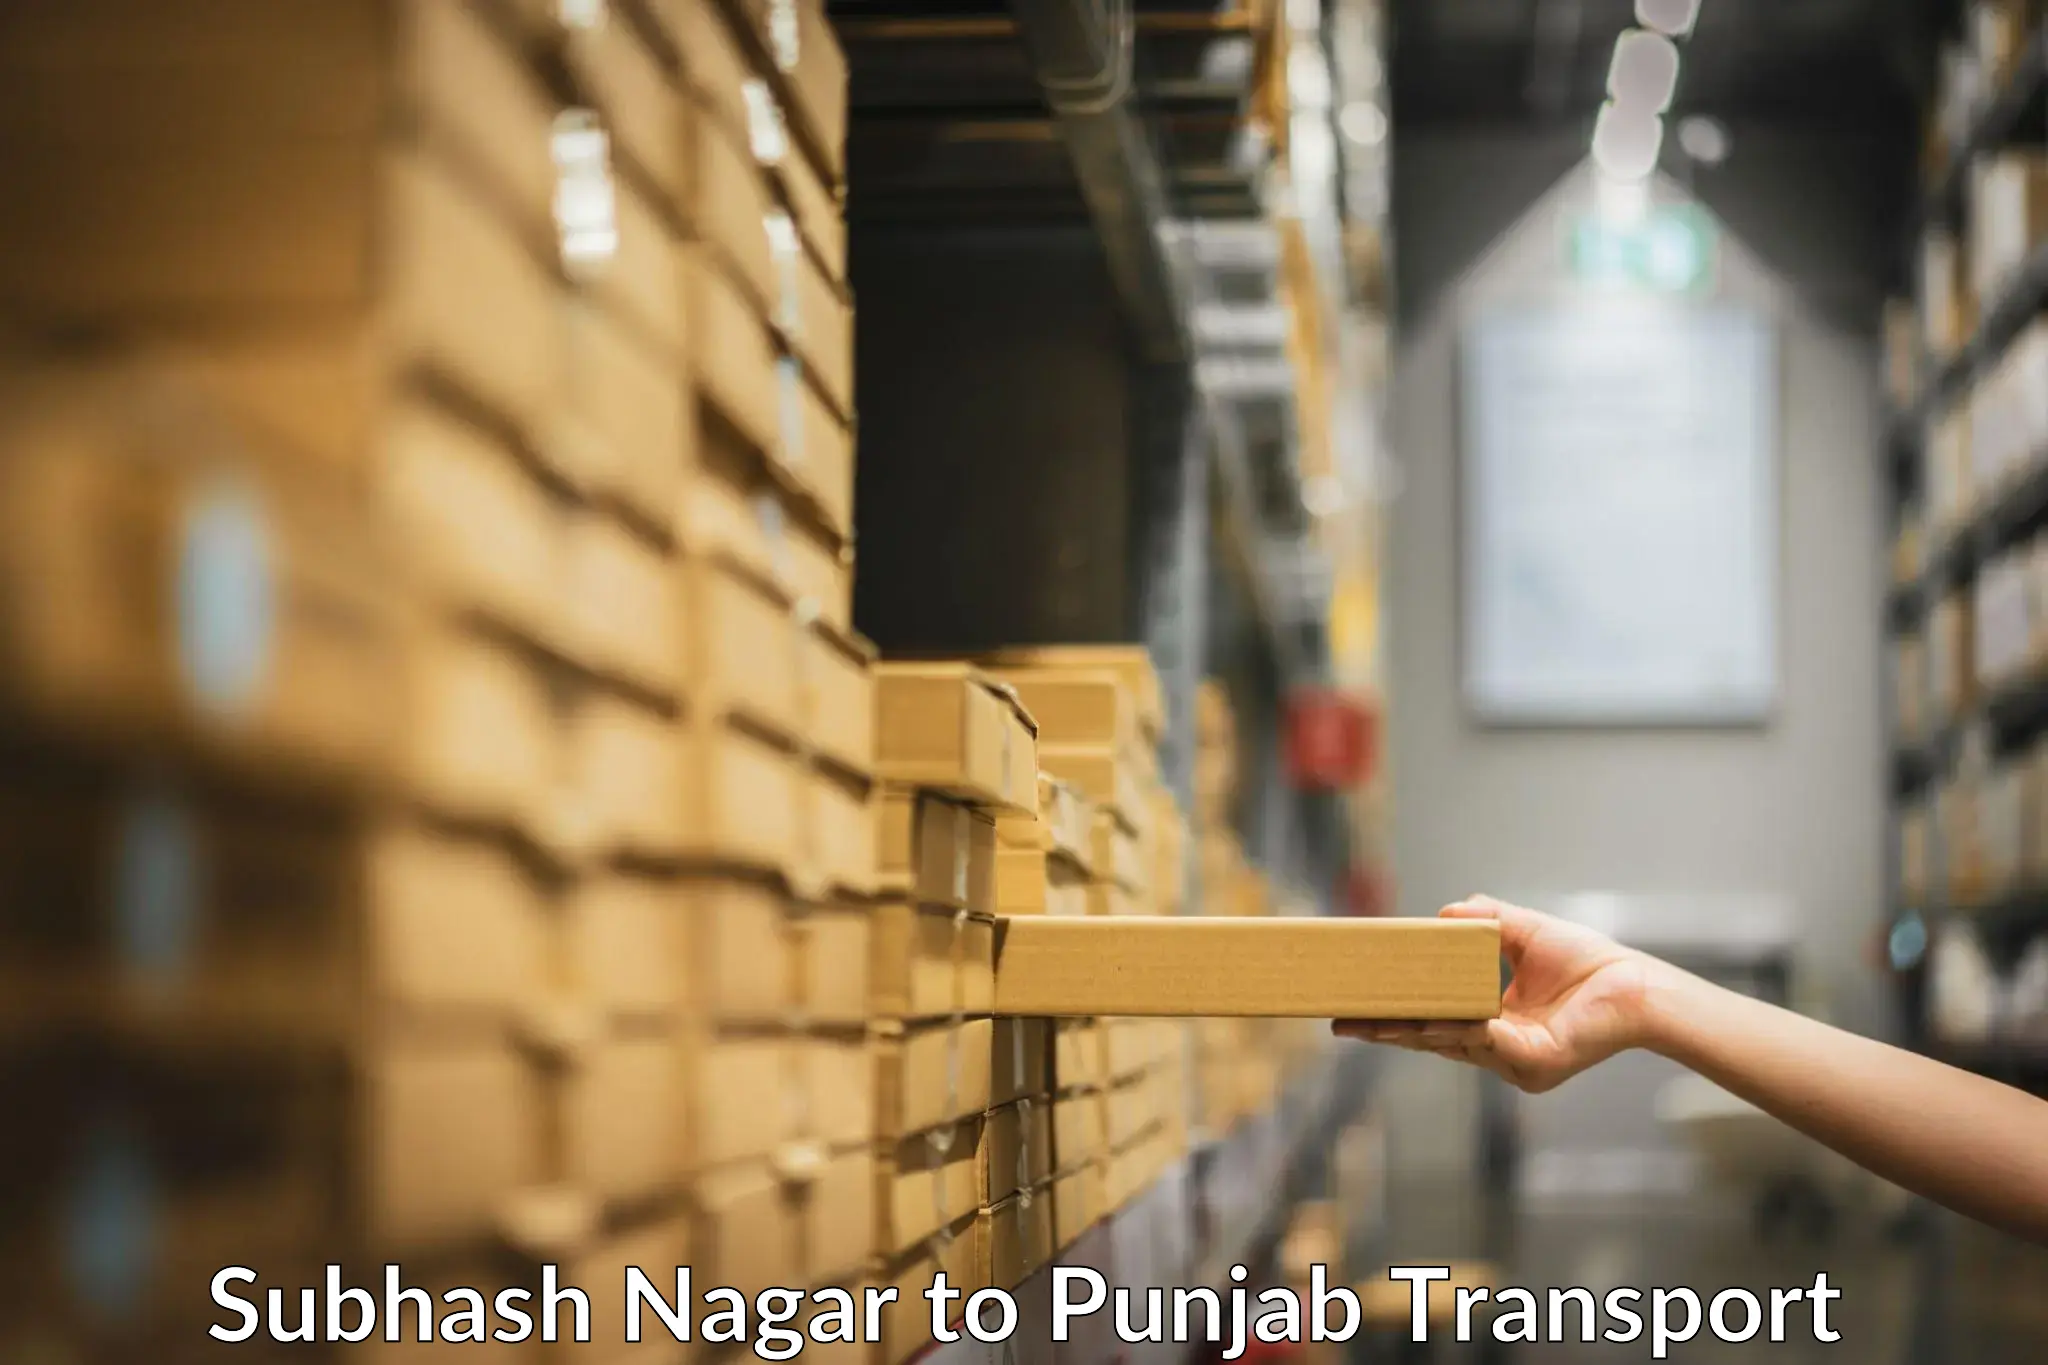 Container transport service Subhash Nagar to Pathankot